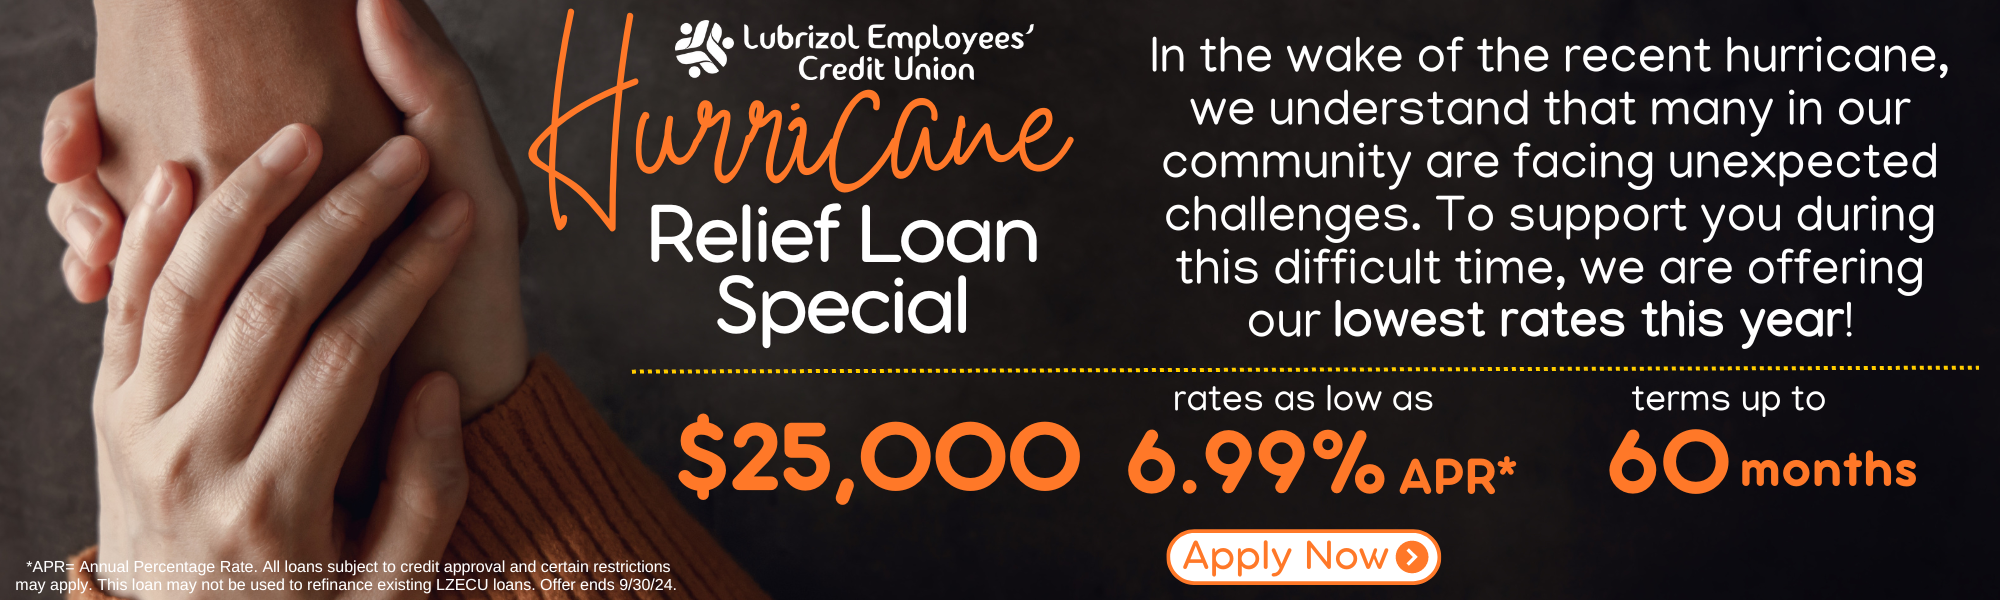 Hurricane relief loan special. Click to apply